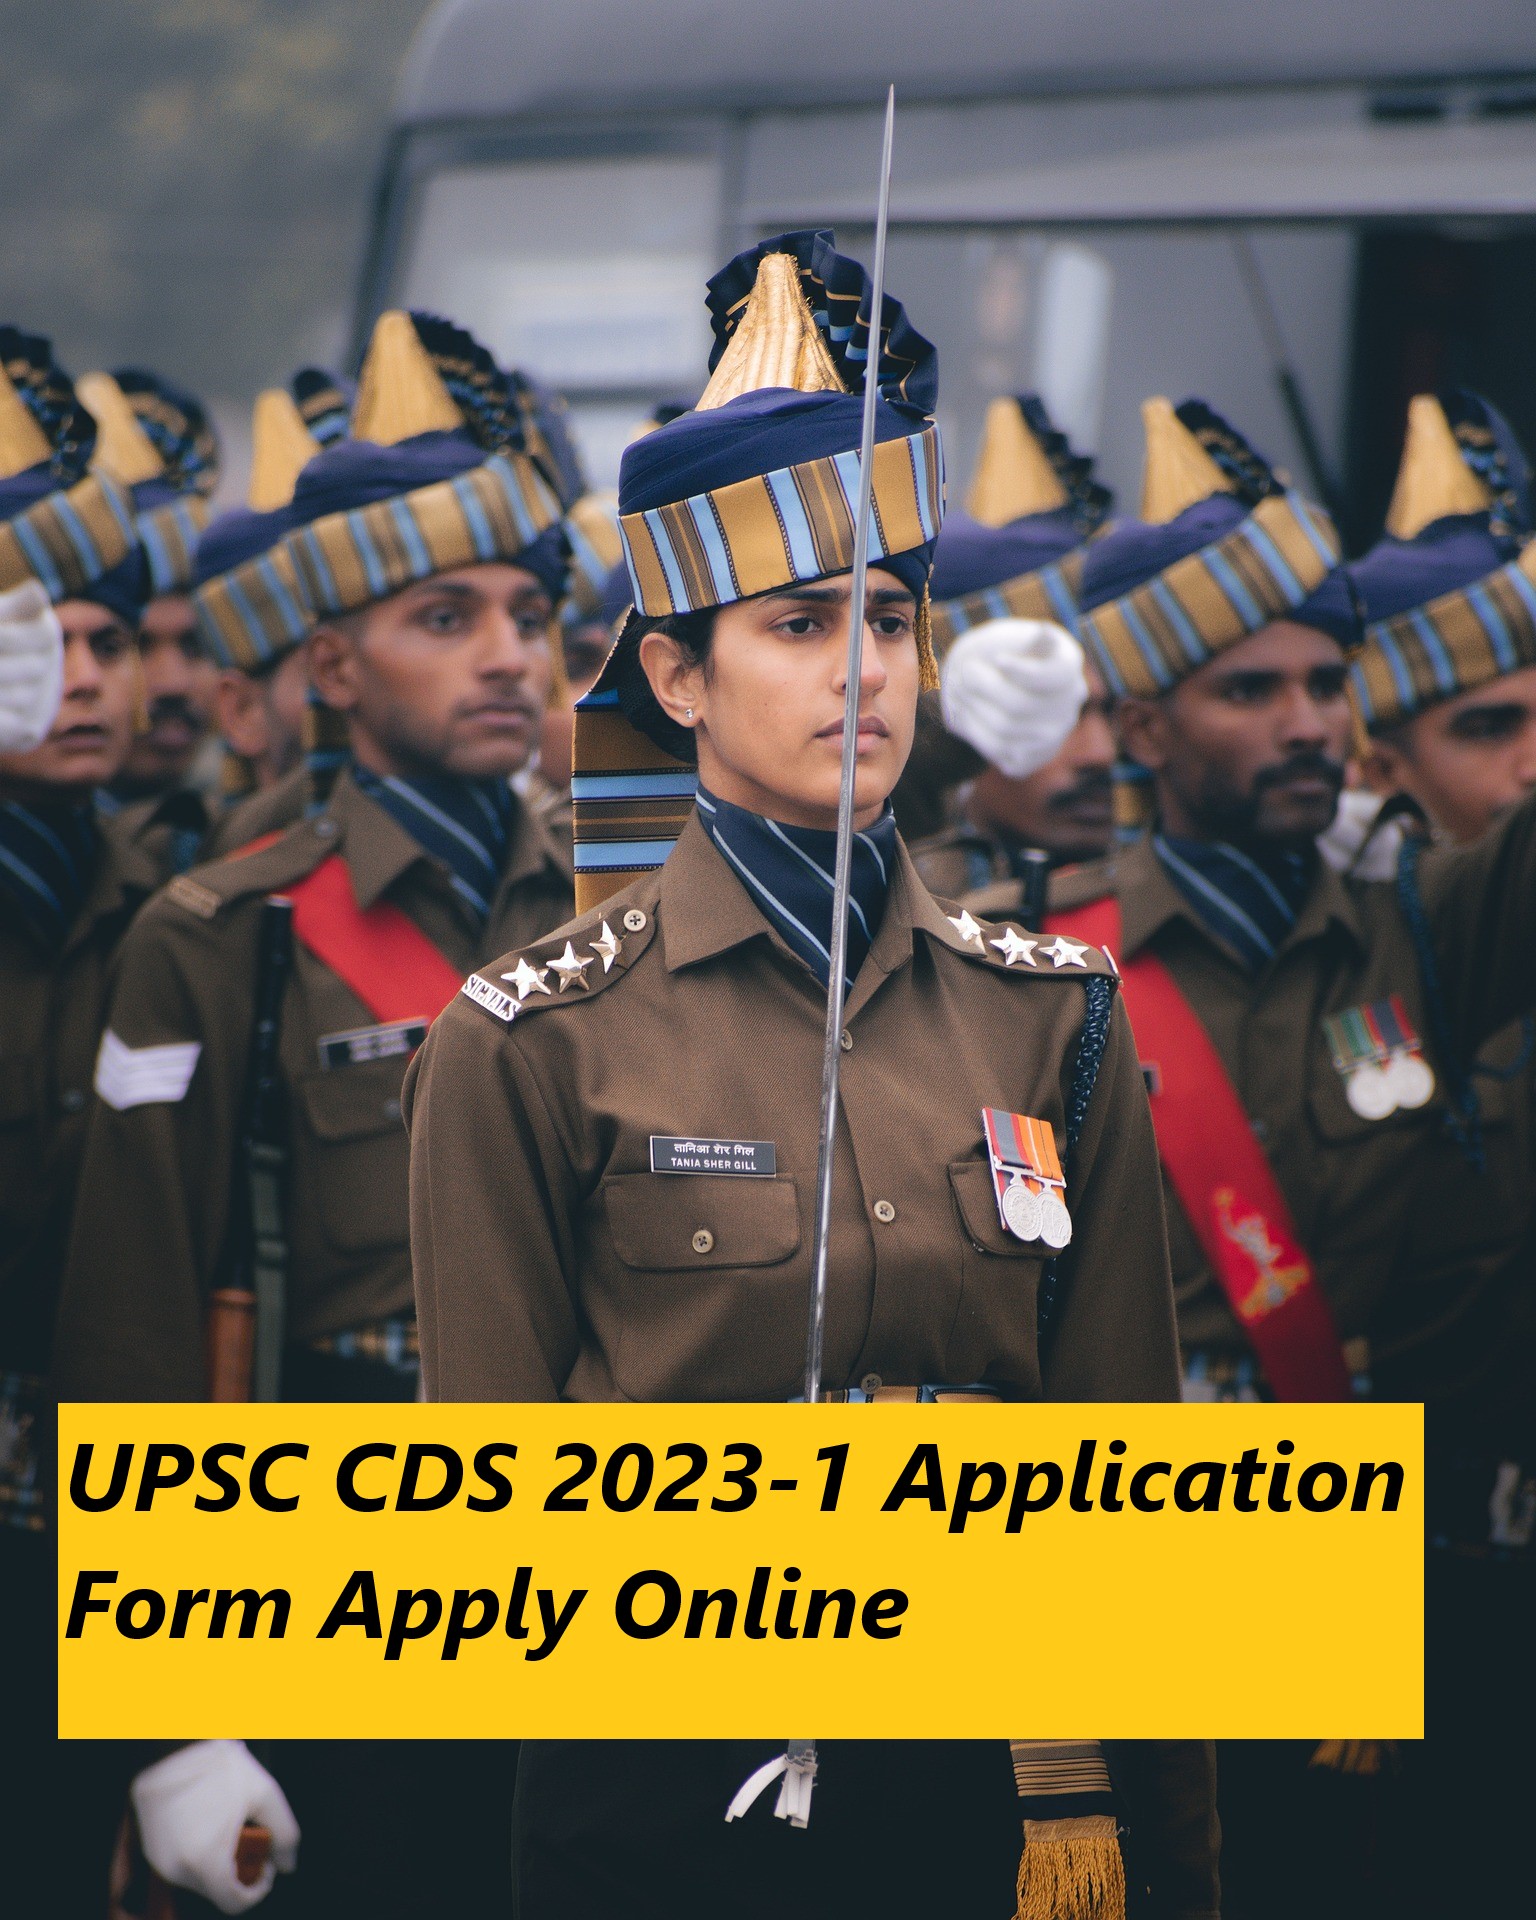 UPSC CDS 1 2023 Application Form Apply Online, Last Date, Eligibility